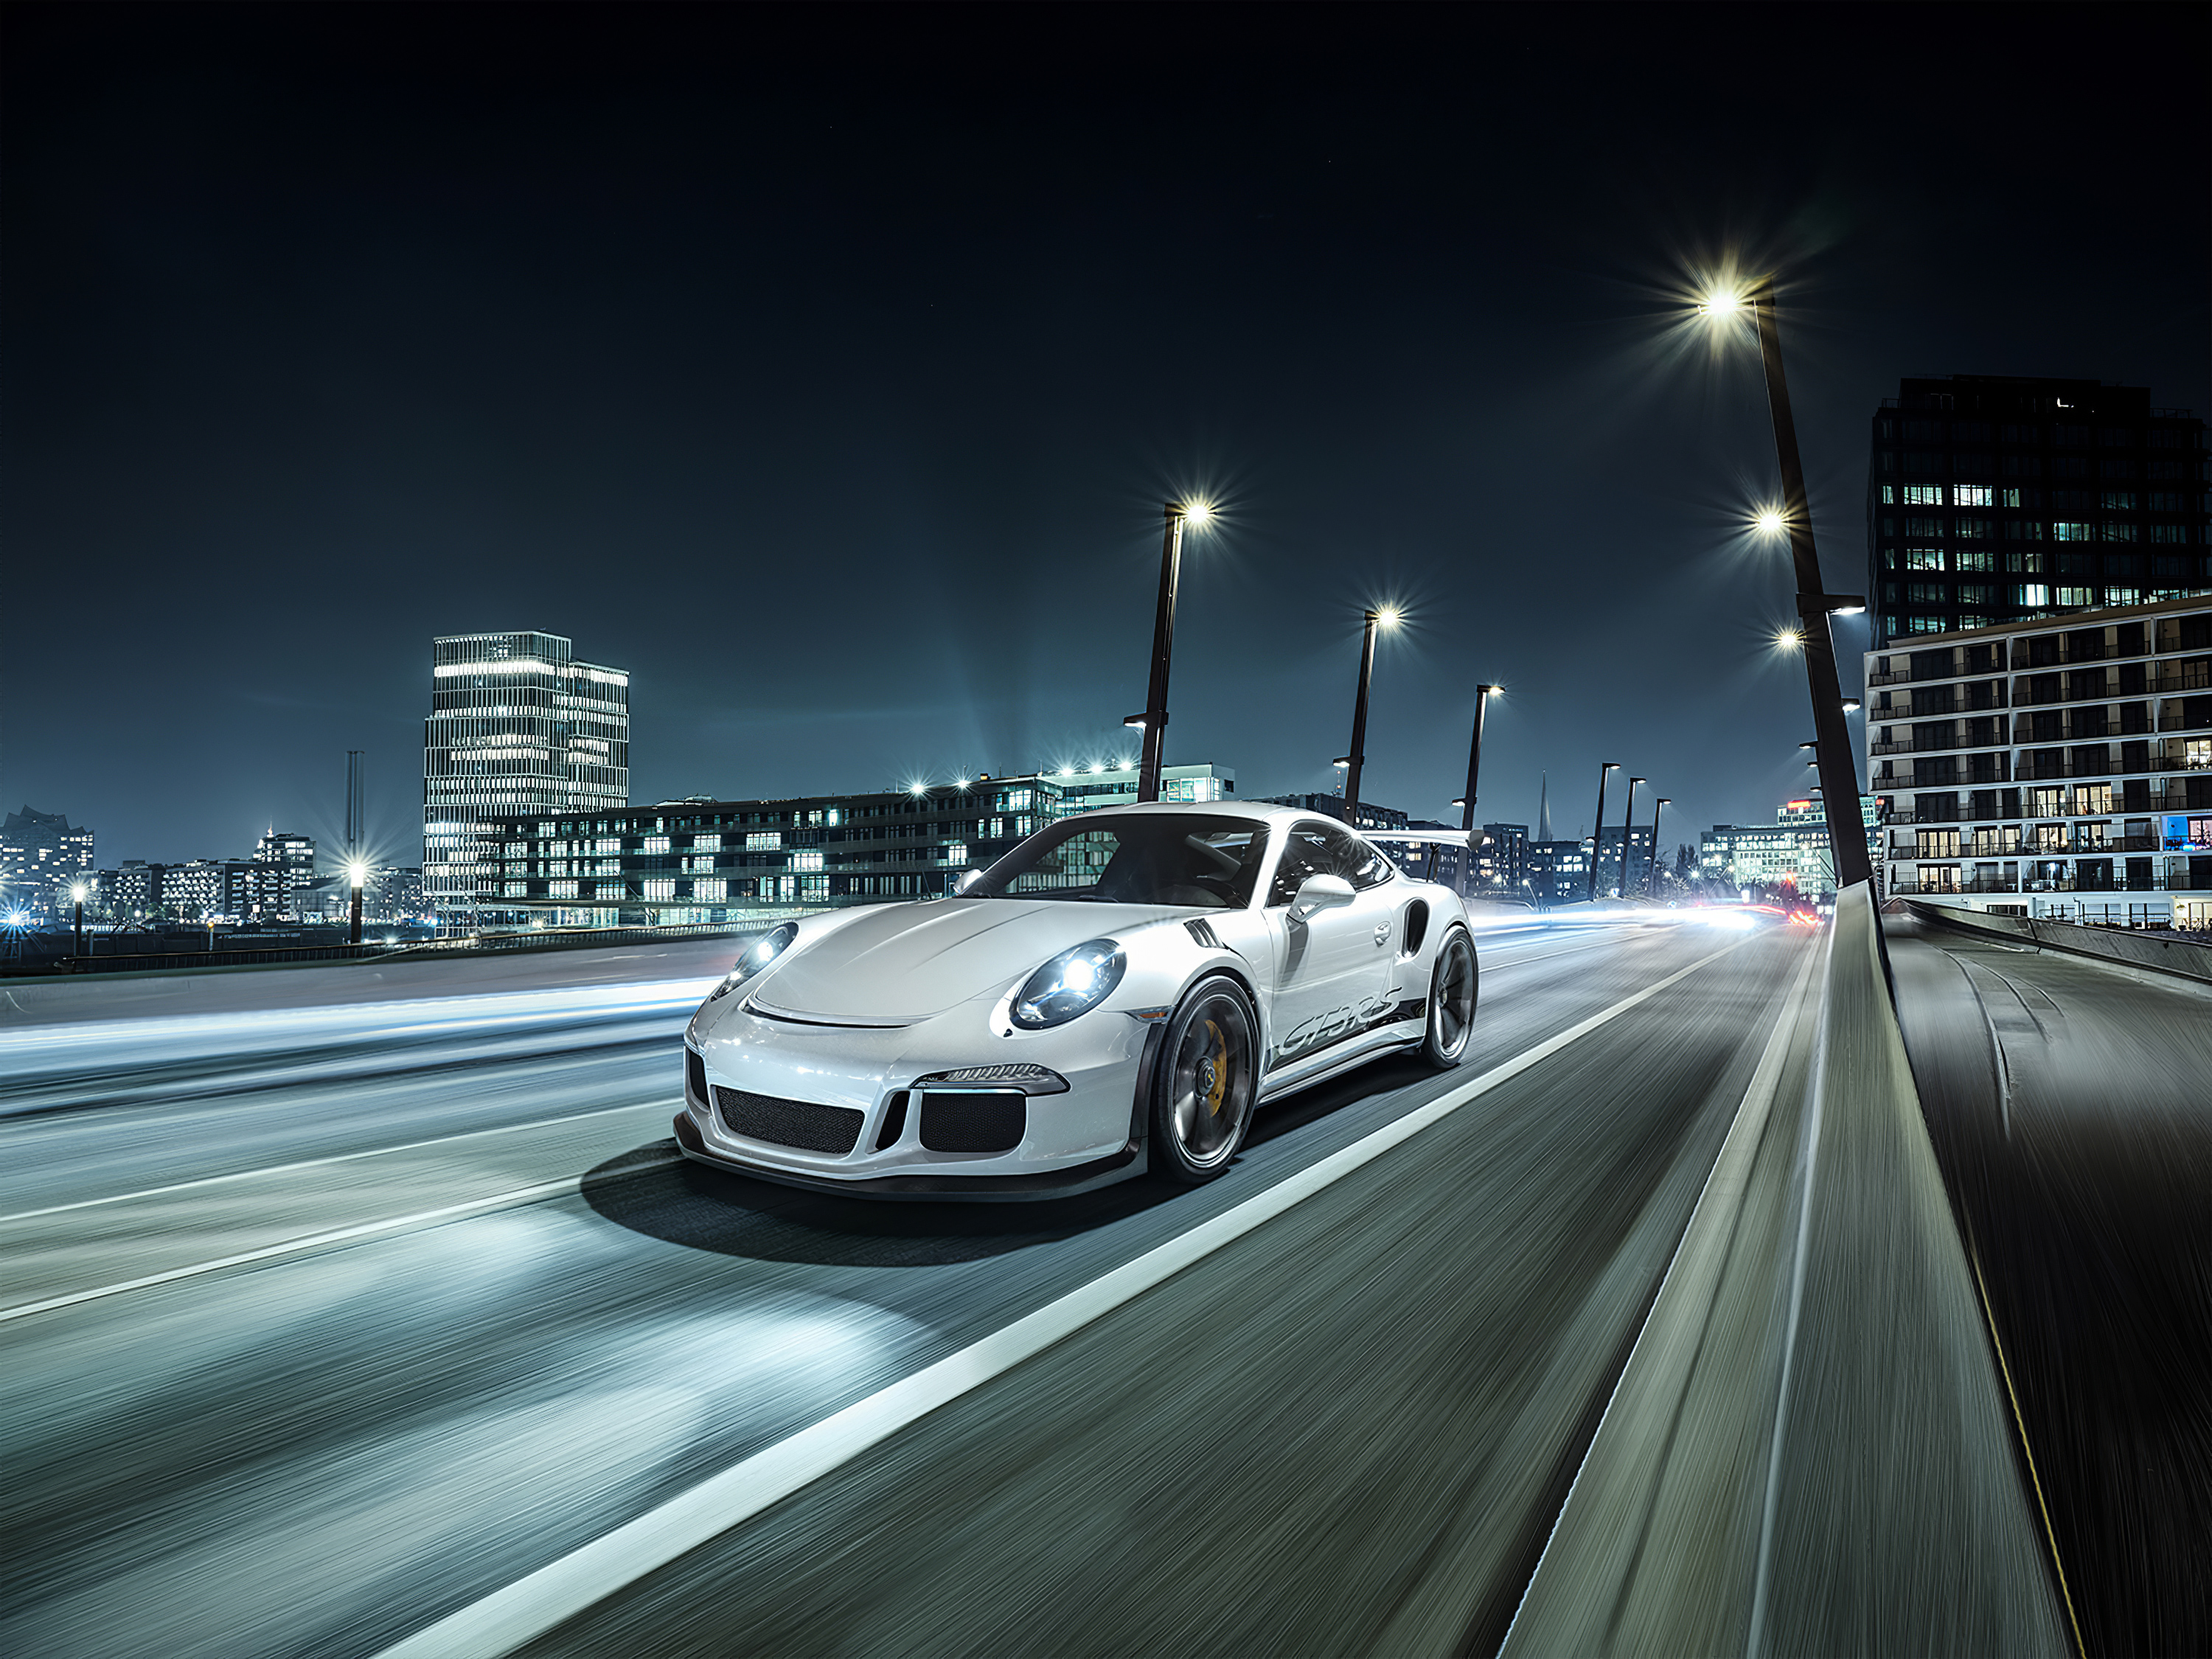 Free photo A picture of a white Porsche driving through a city at night.